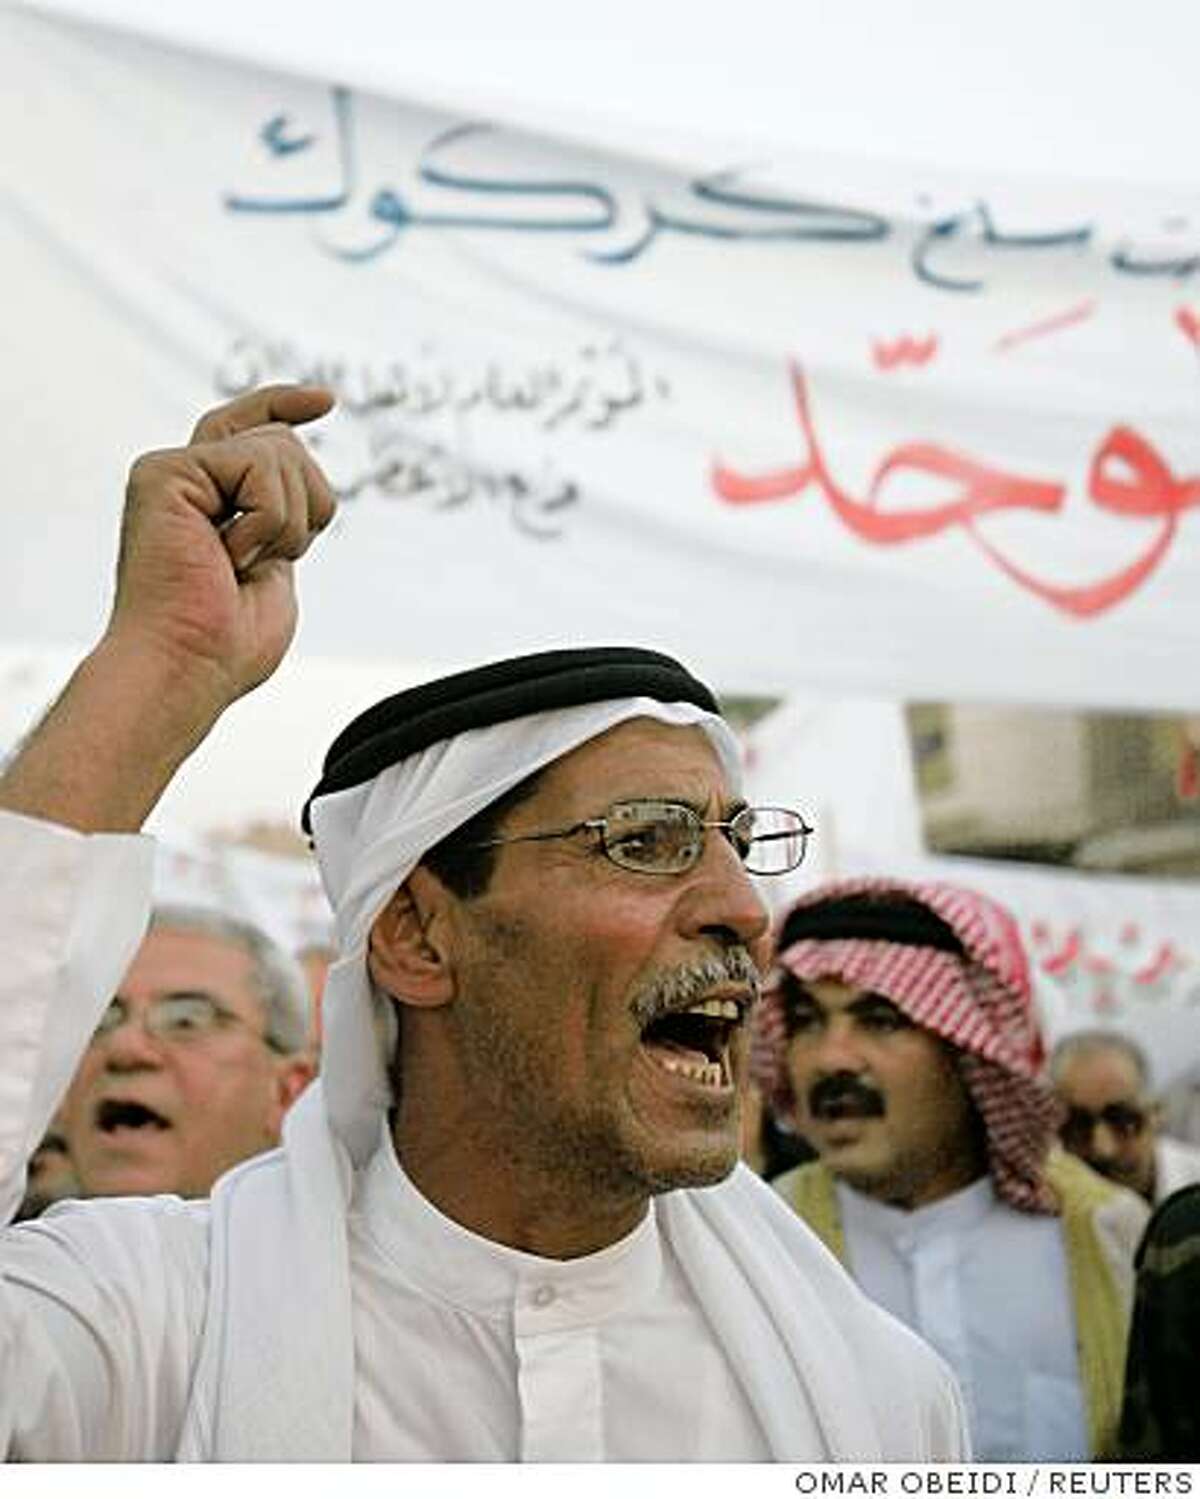 A demonstrator chants slogans during a protest in Baghdad's Adhamiya district August 4, 2008. Hundreds people took to the streets supporting the passage of the provincial council elections law, which includes an article postponing Kirkuk's elections. REUTERS/Omar Obeidi (IRAQ)